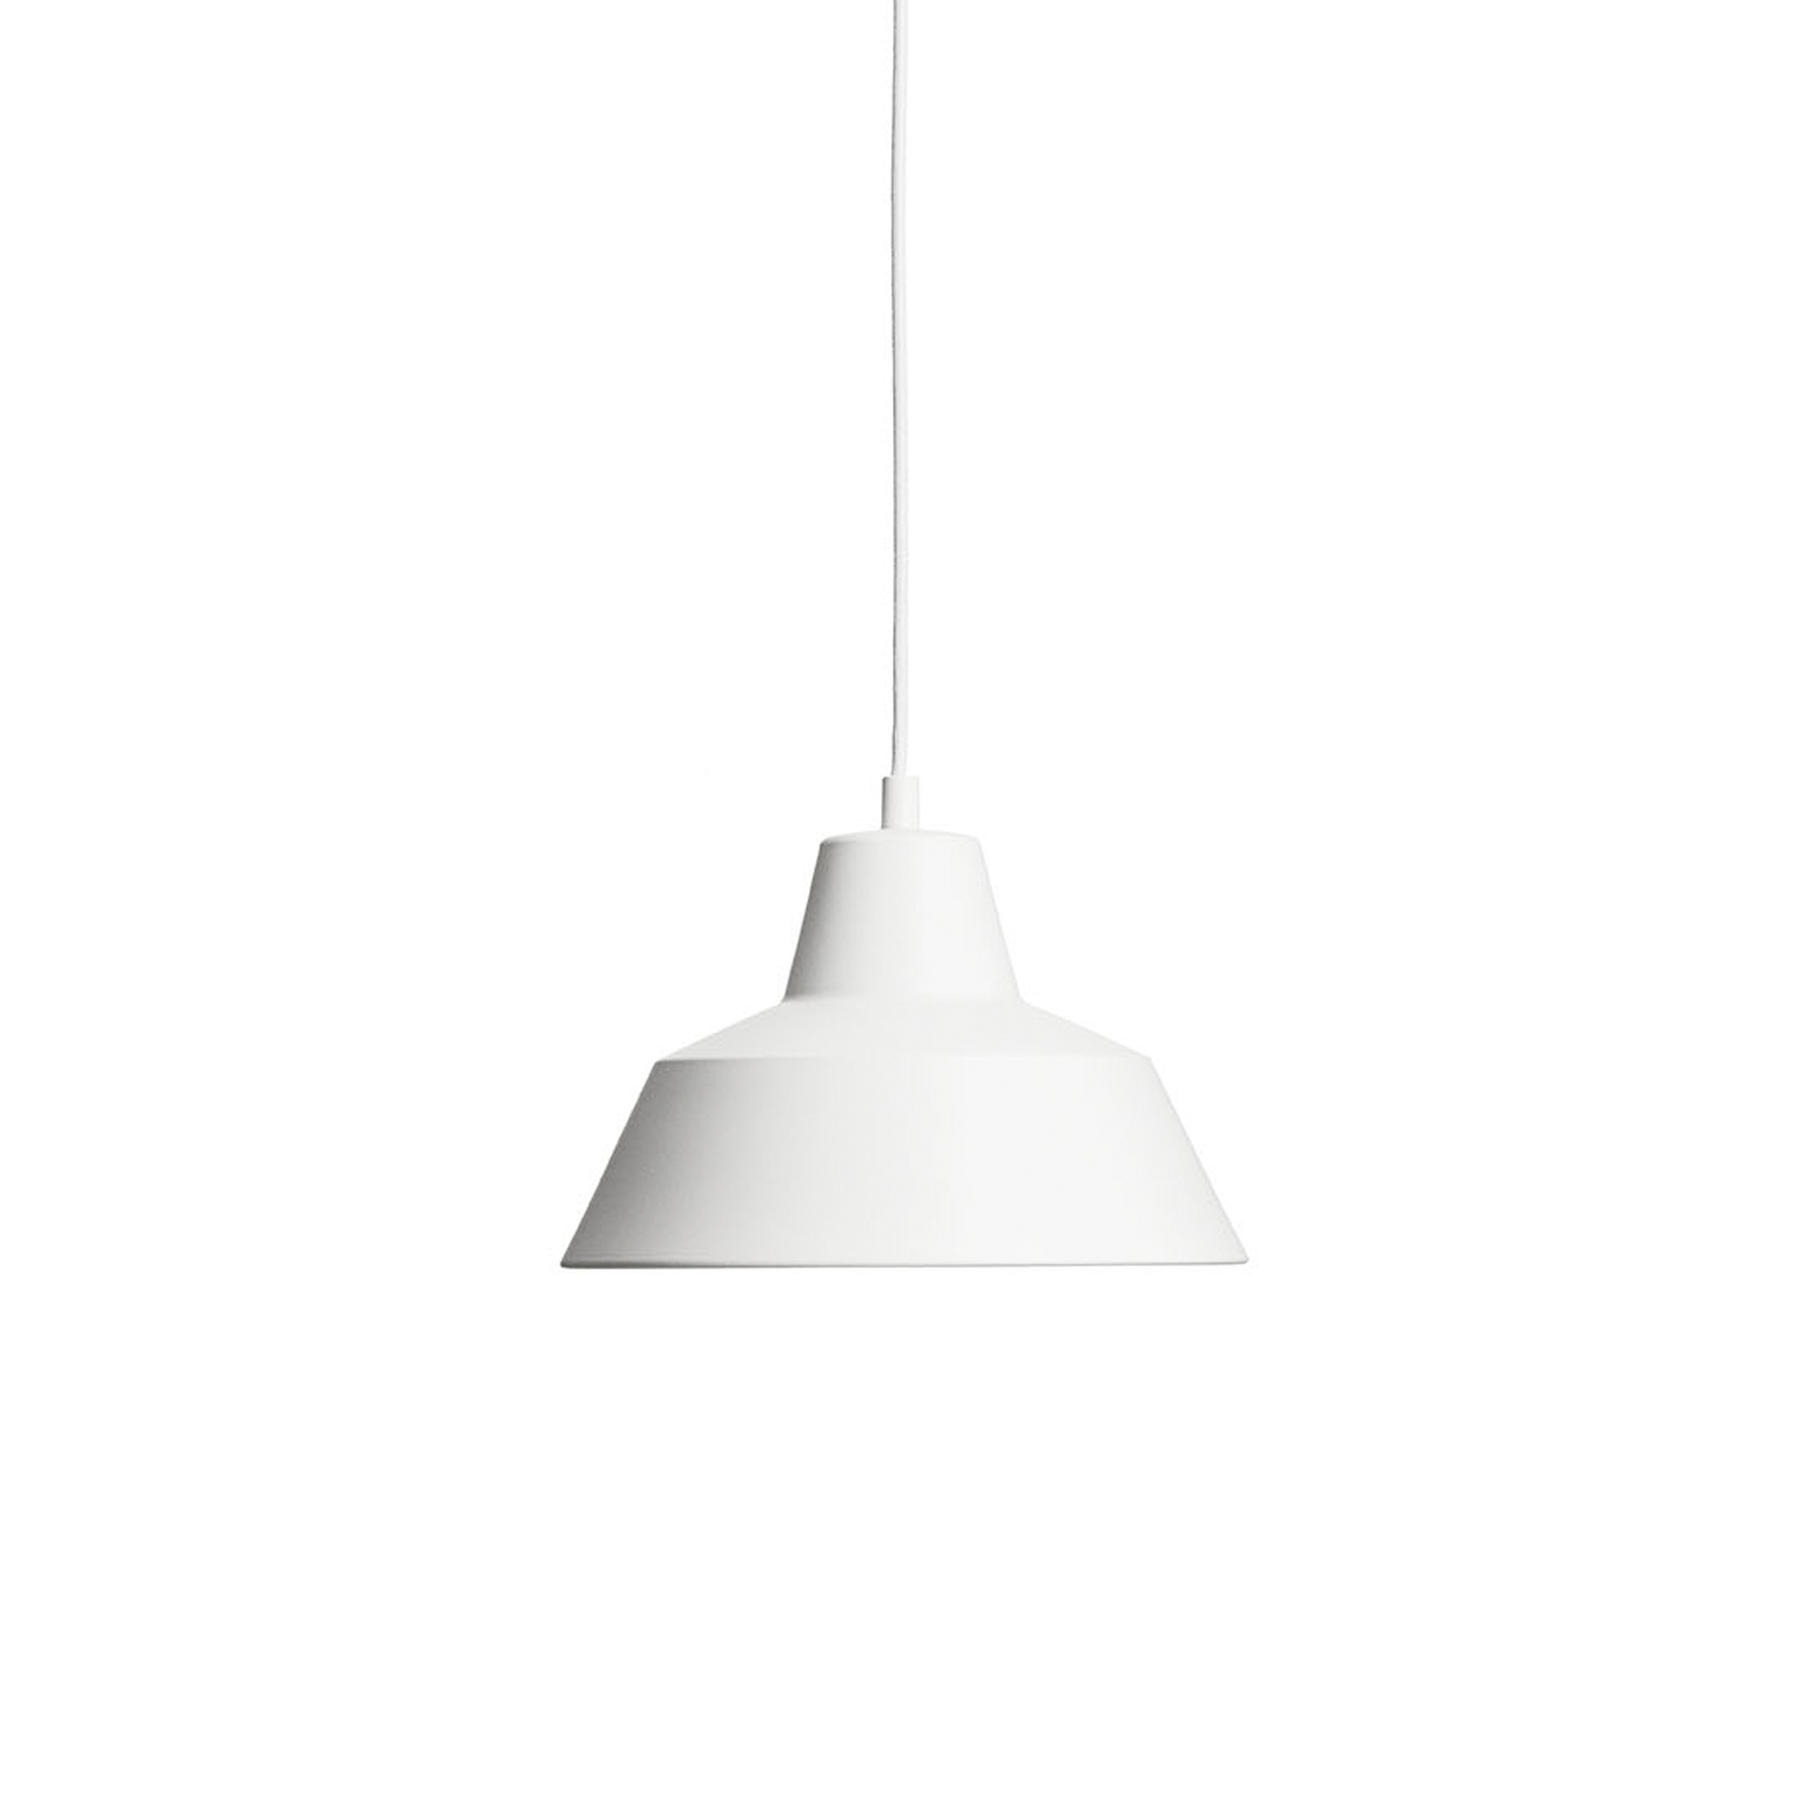 Made by Hand, Workshop Pendant W2, Matte White